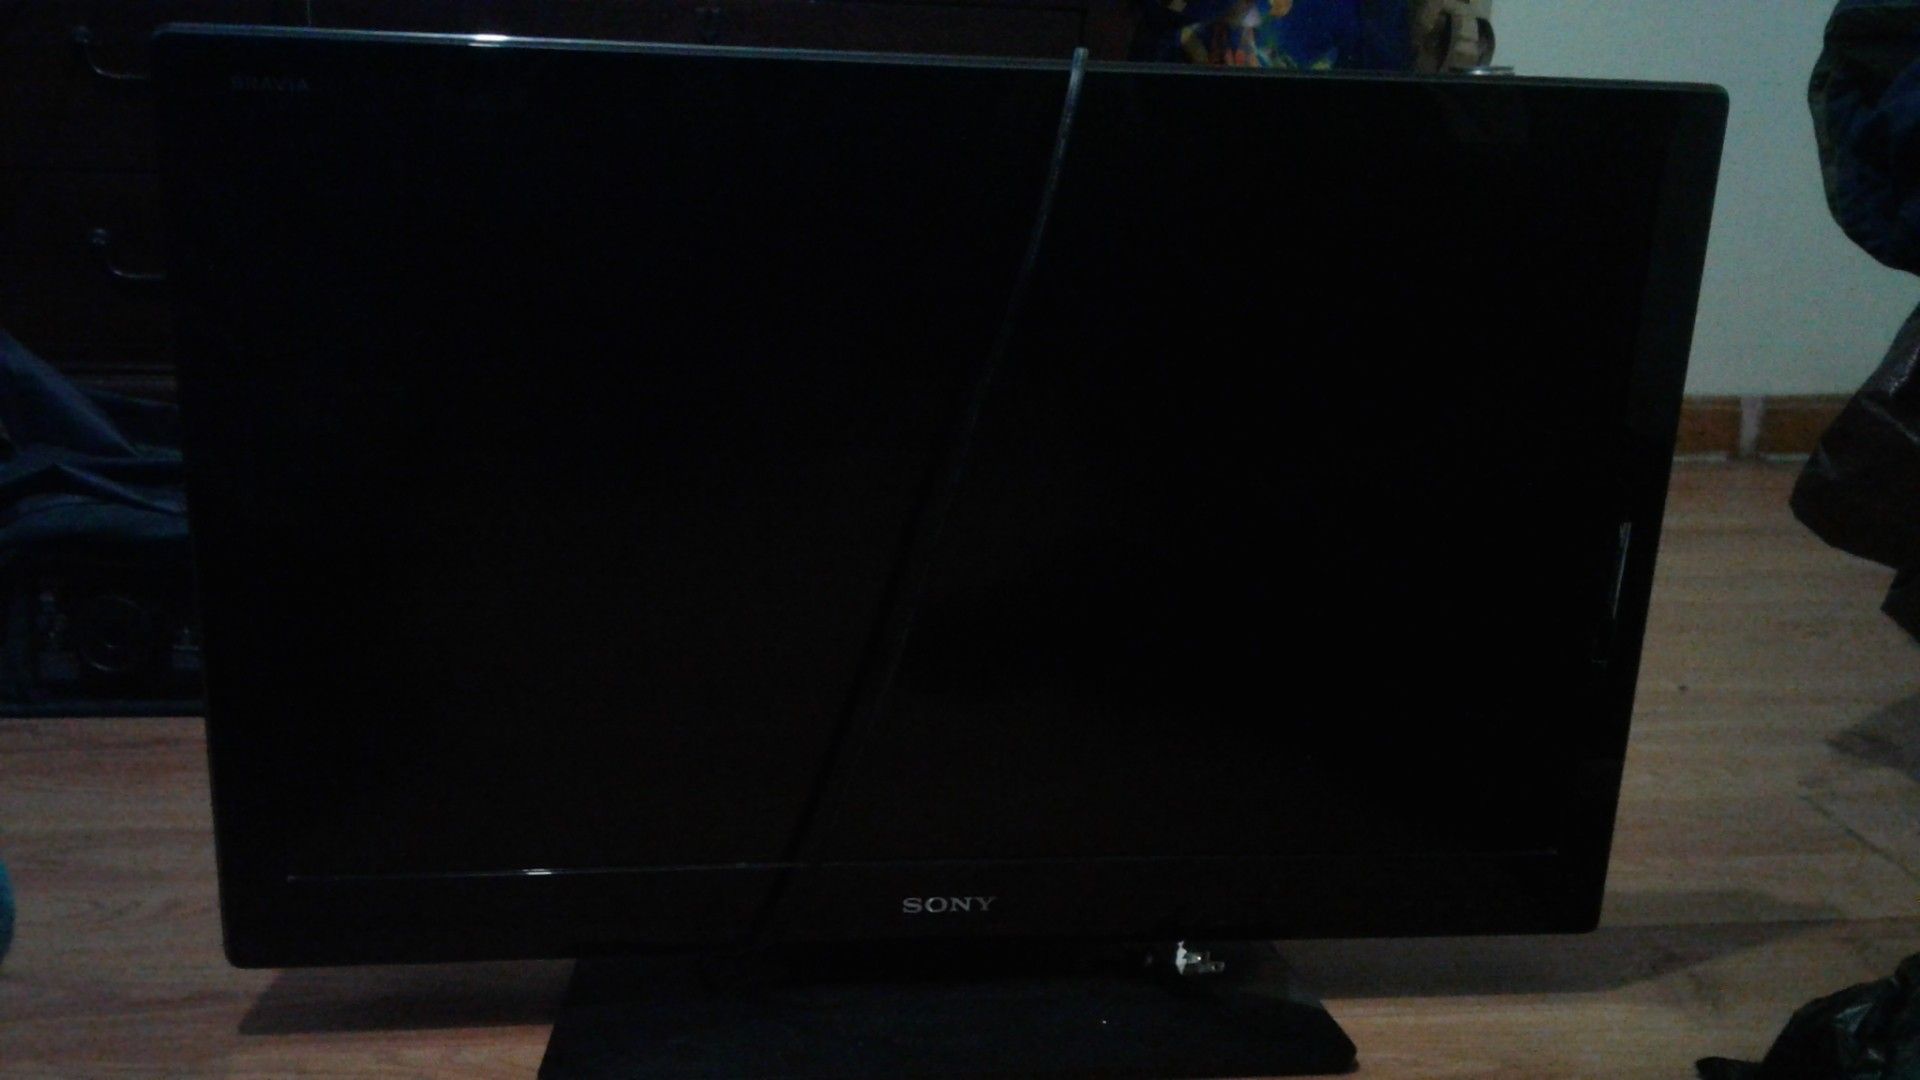 SONY TV plasma 32 inch dont have remote control